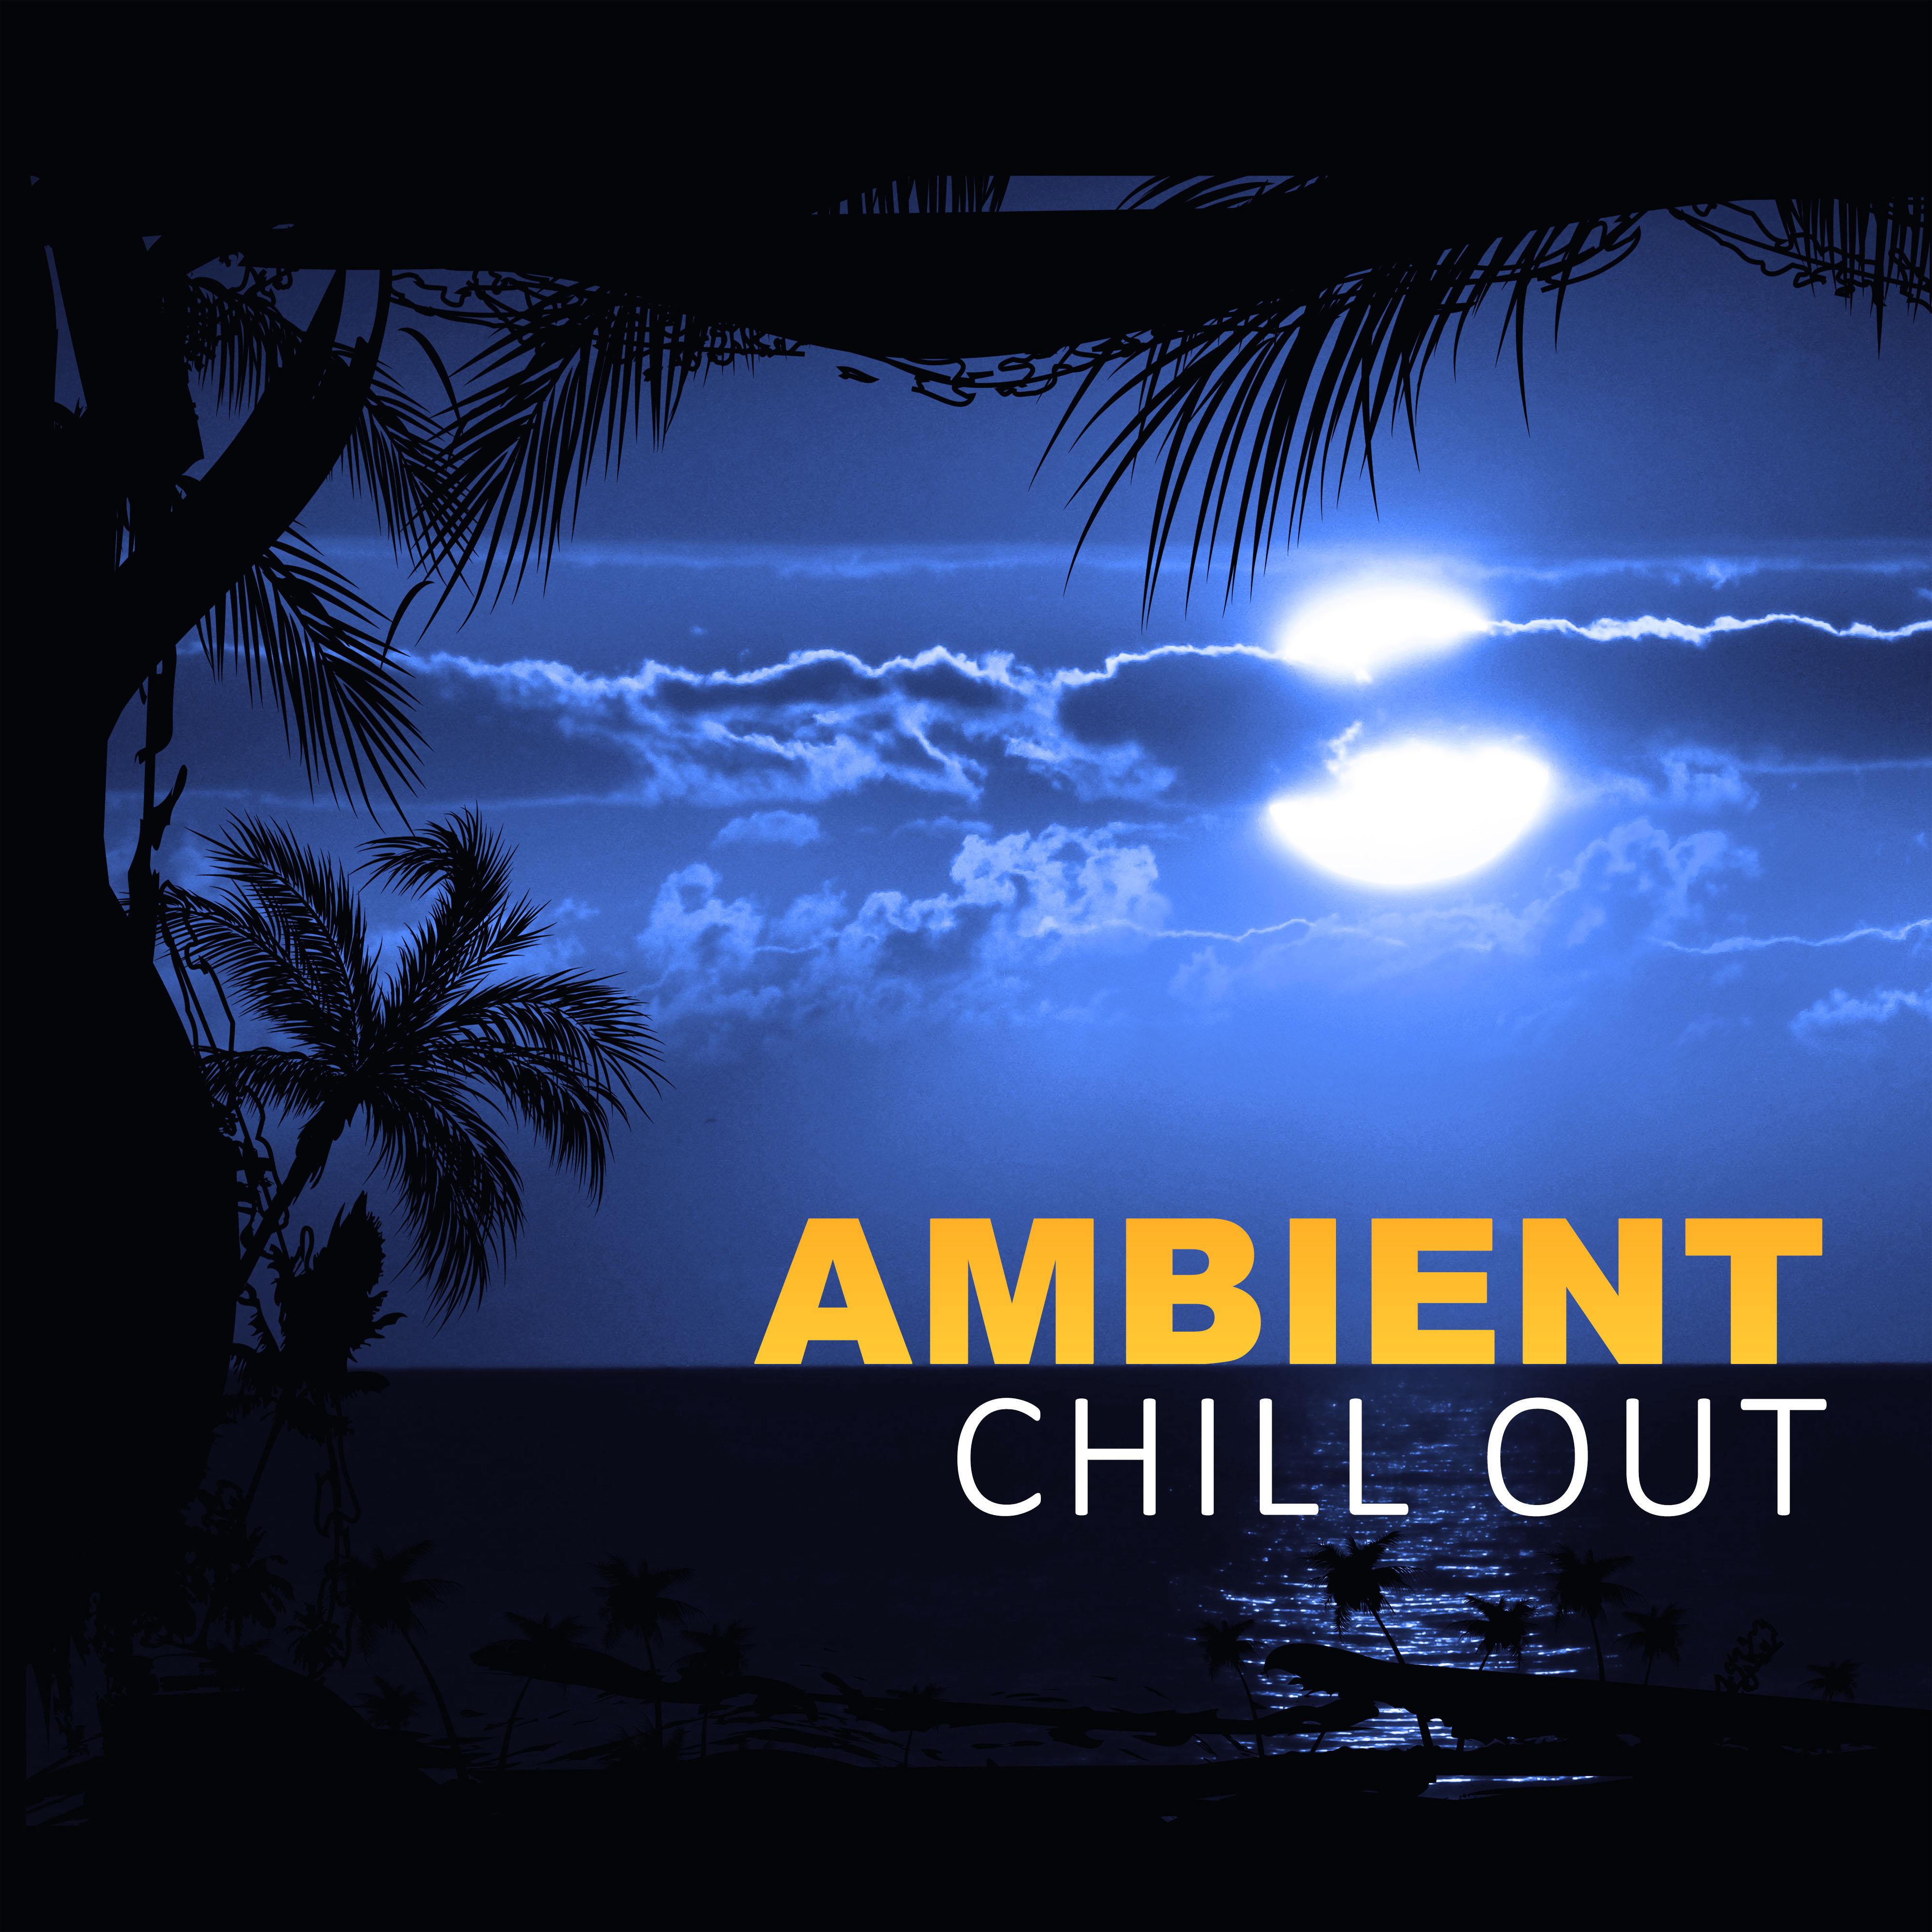 Ambient Chill Out – House Del Mar, Beach House, Tropical Bass, Relaxing Music